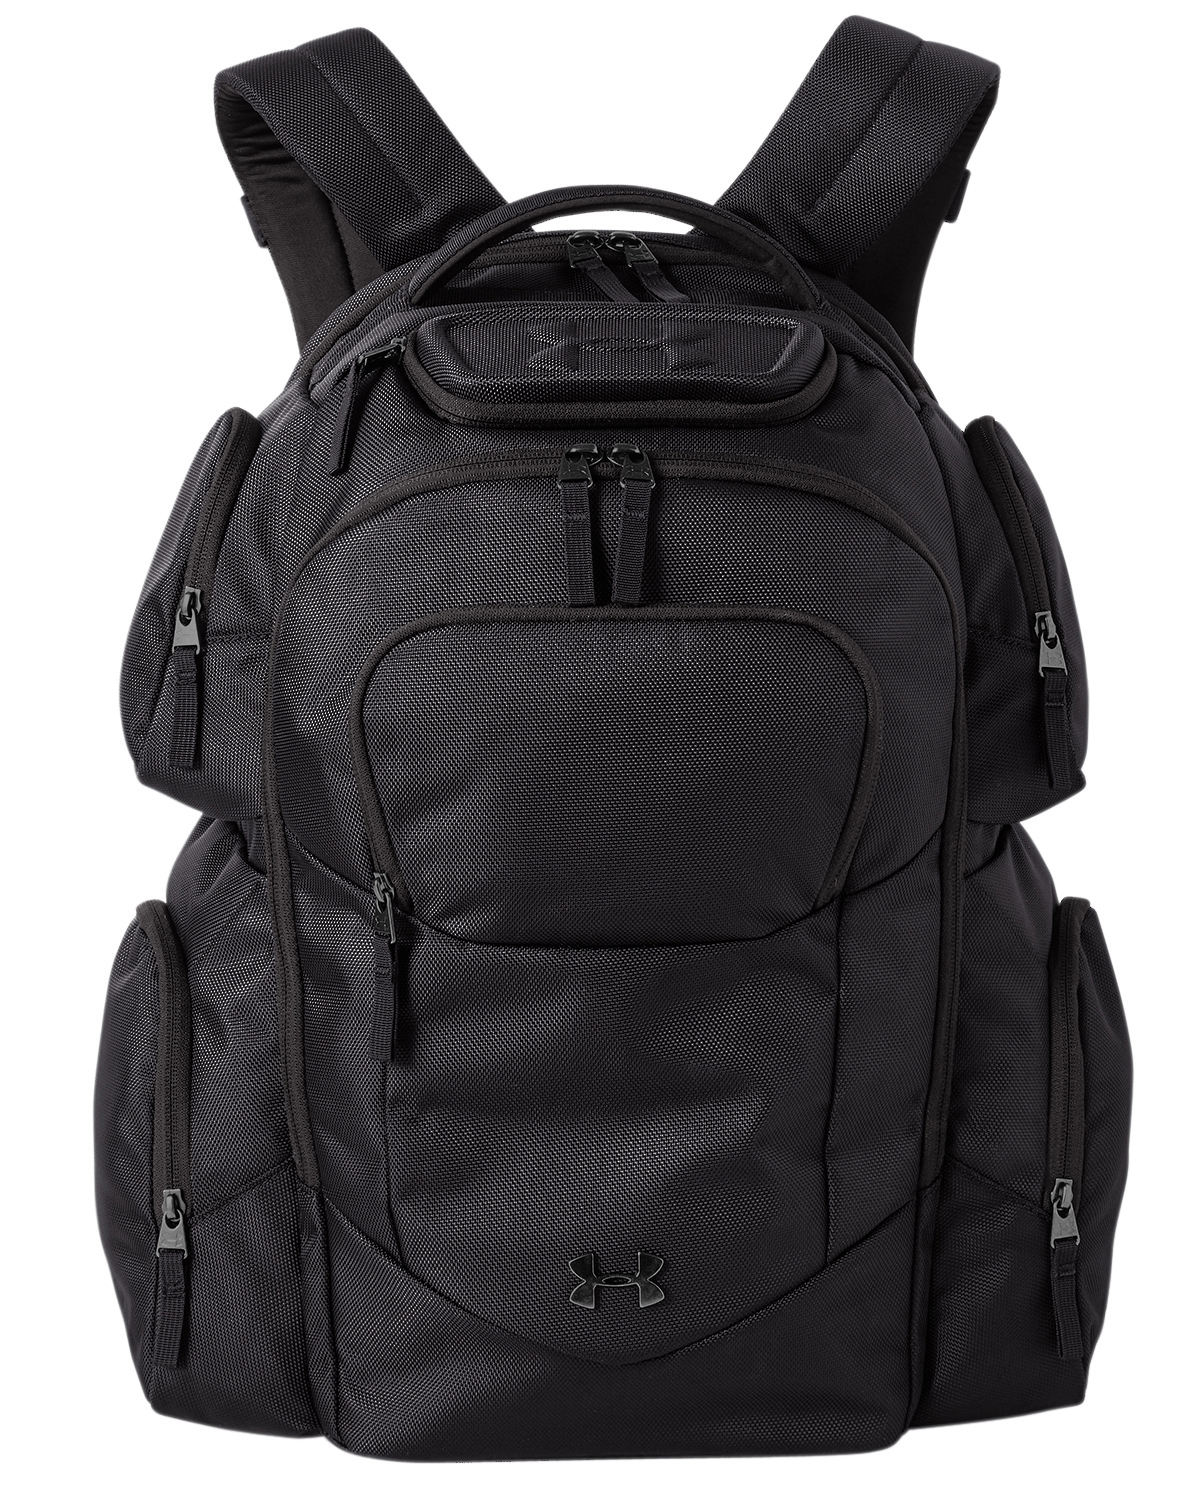 1345066 Under Armour Unisex Travel Backpack